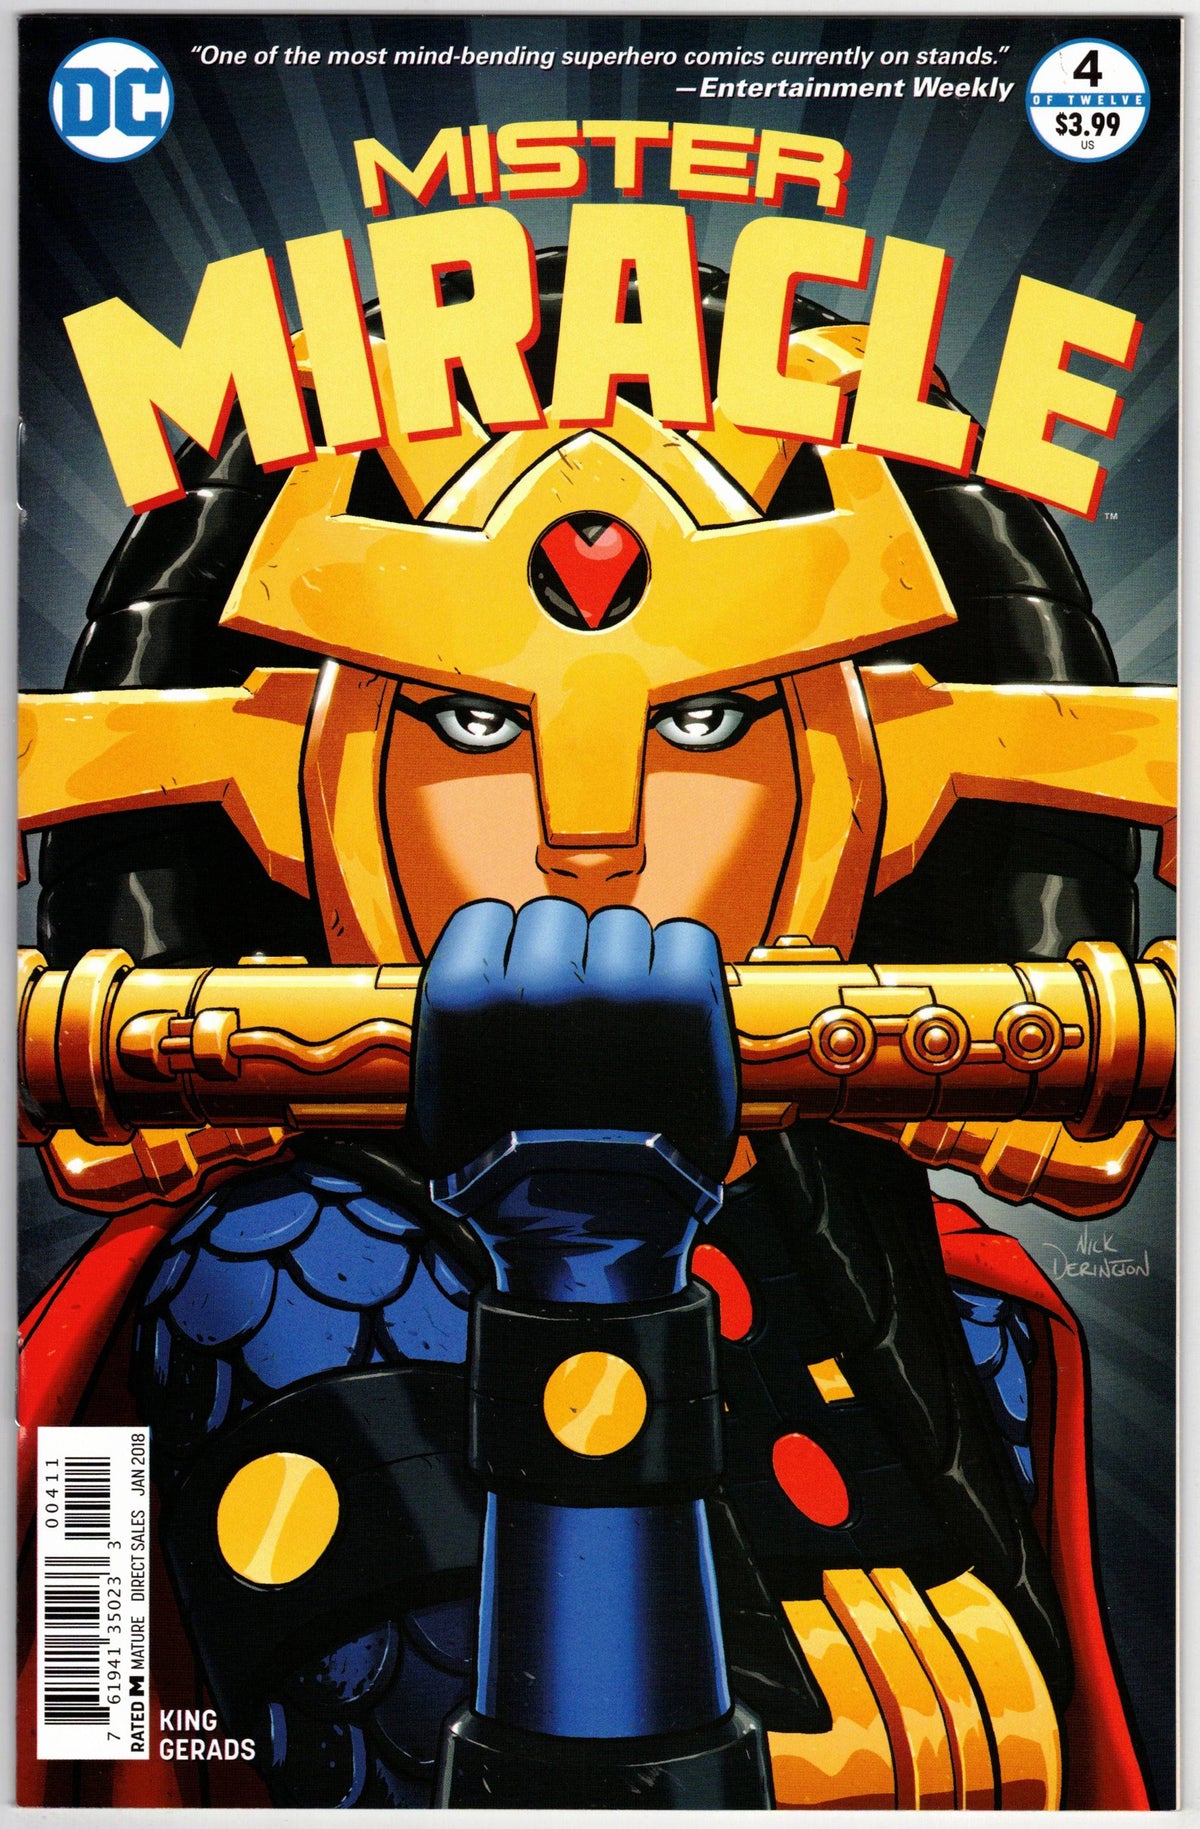 Photo of Mister Miracle, Vol. 4 (2017) Issue 4A - Near Mint Comic sold by Stronghold Collectibles